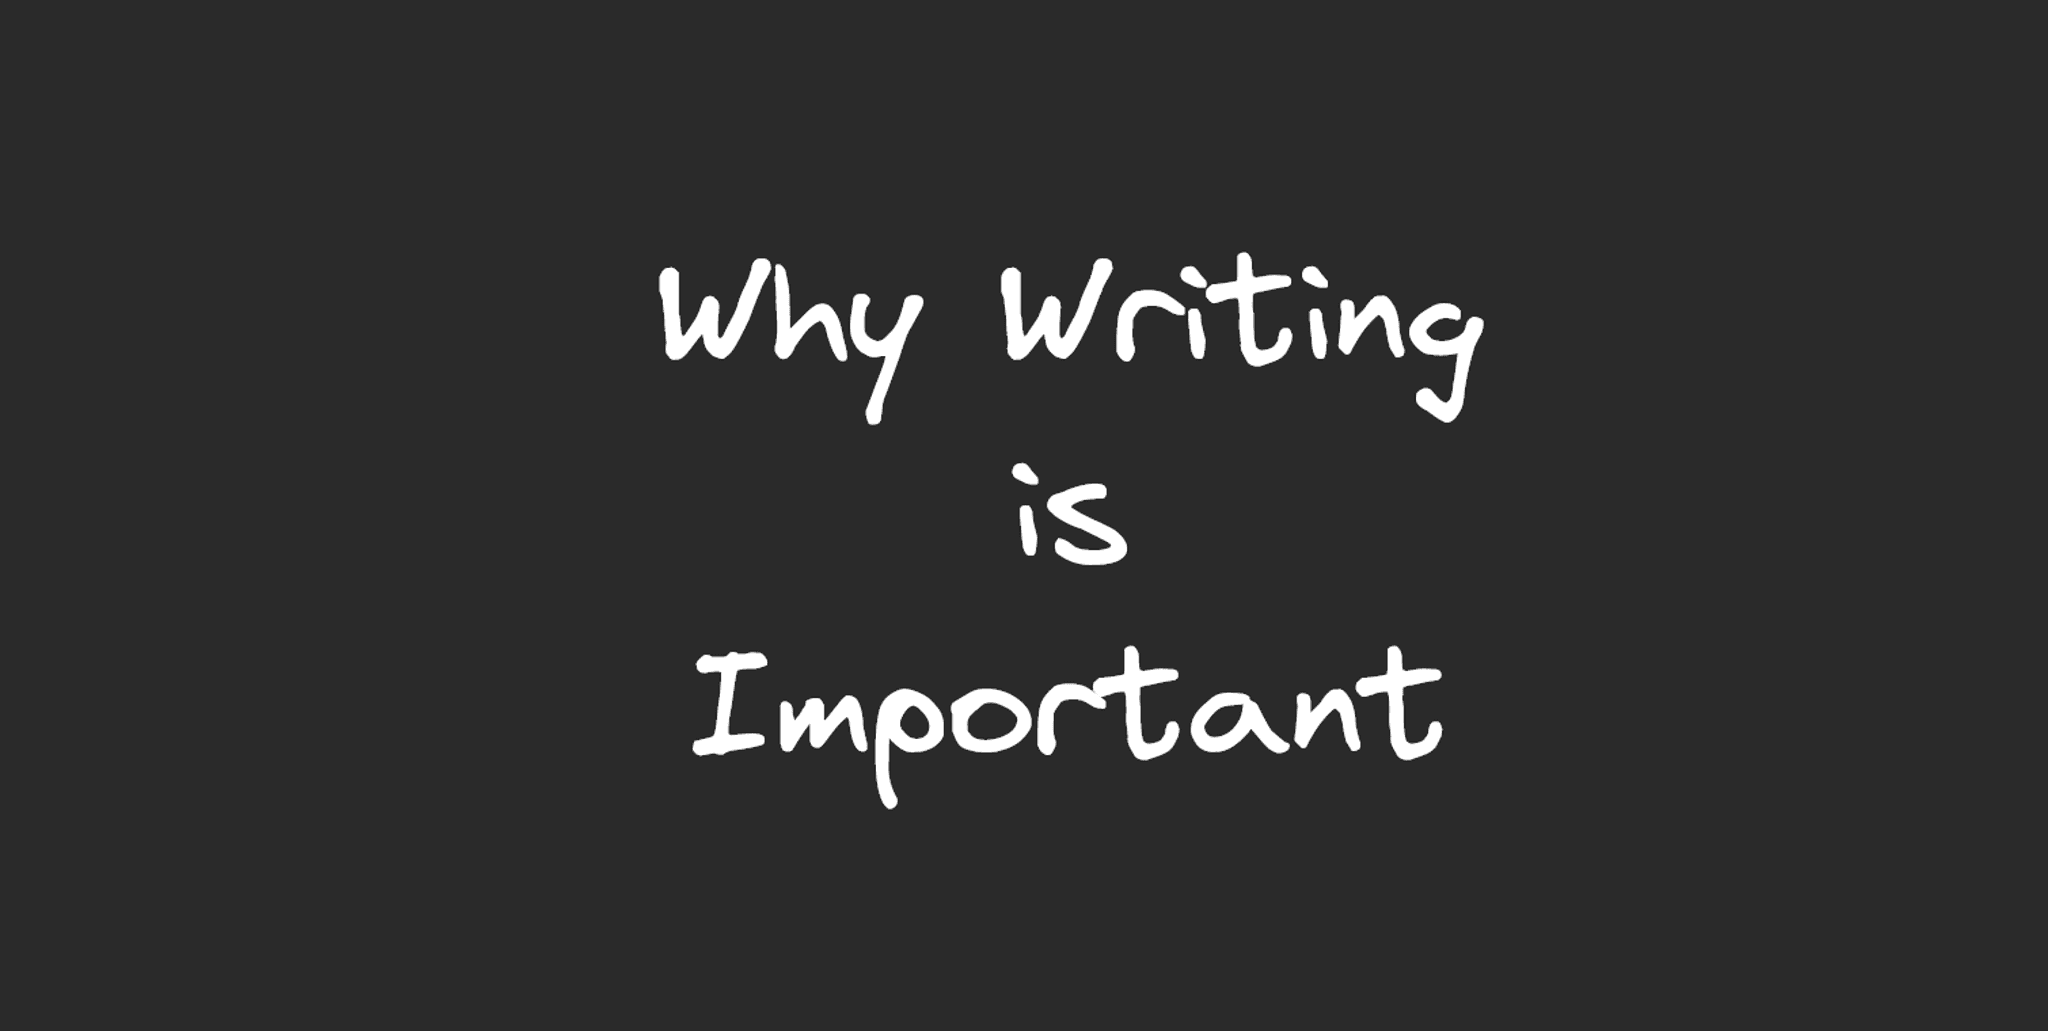 An image containing the text, "Why Writing is Important".